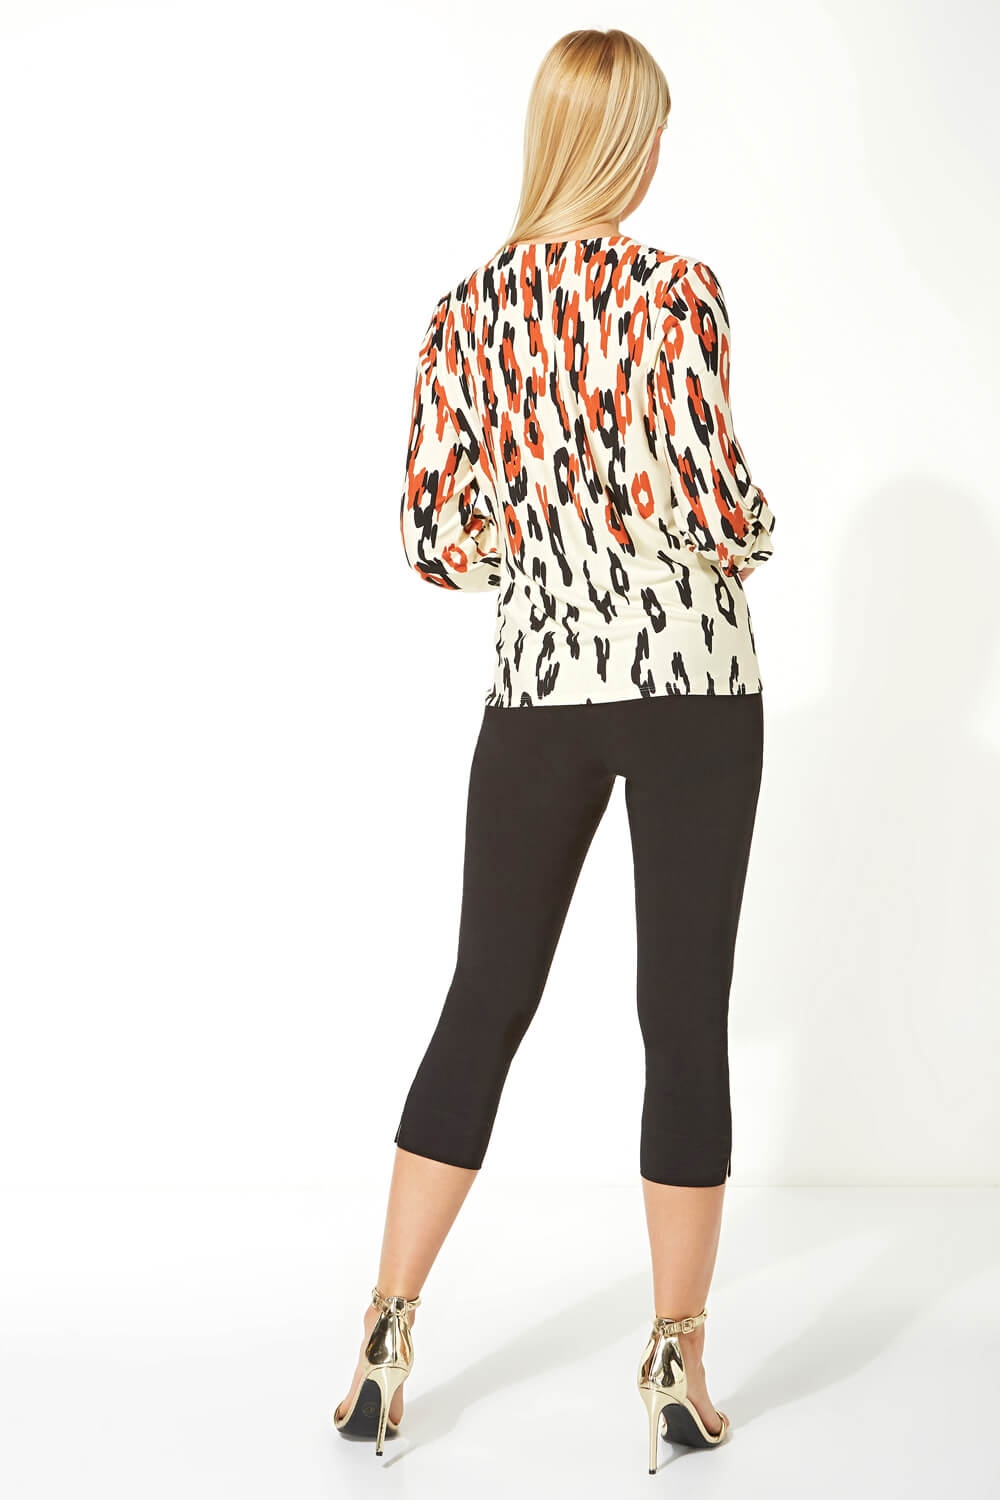 Neutral Tie Front Animal Print Top, Image 3 of 5